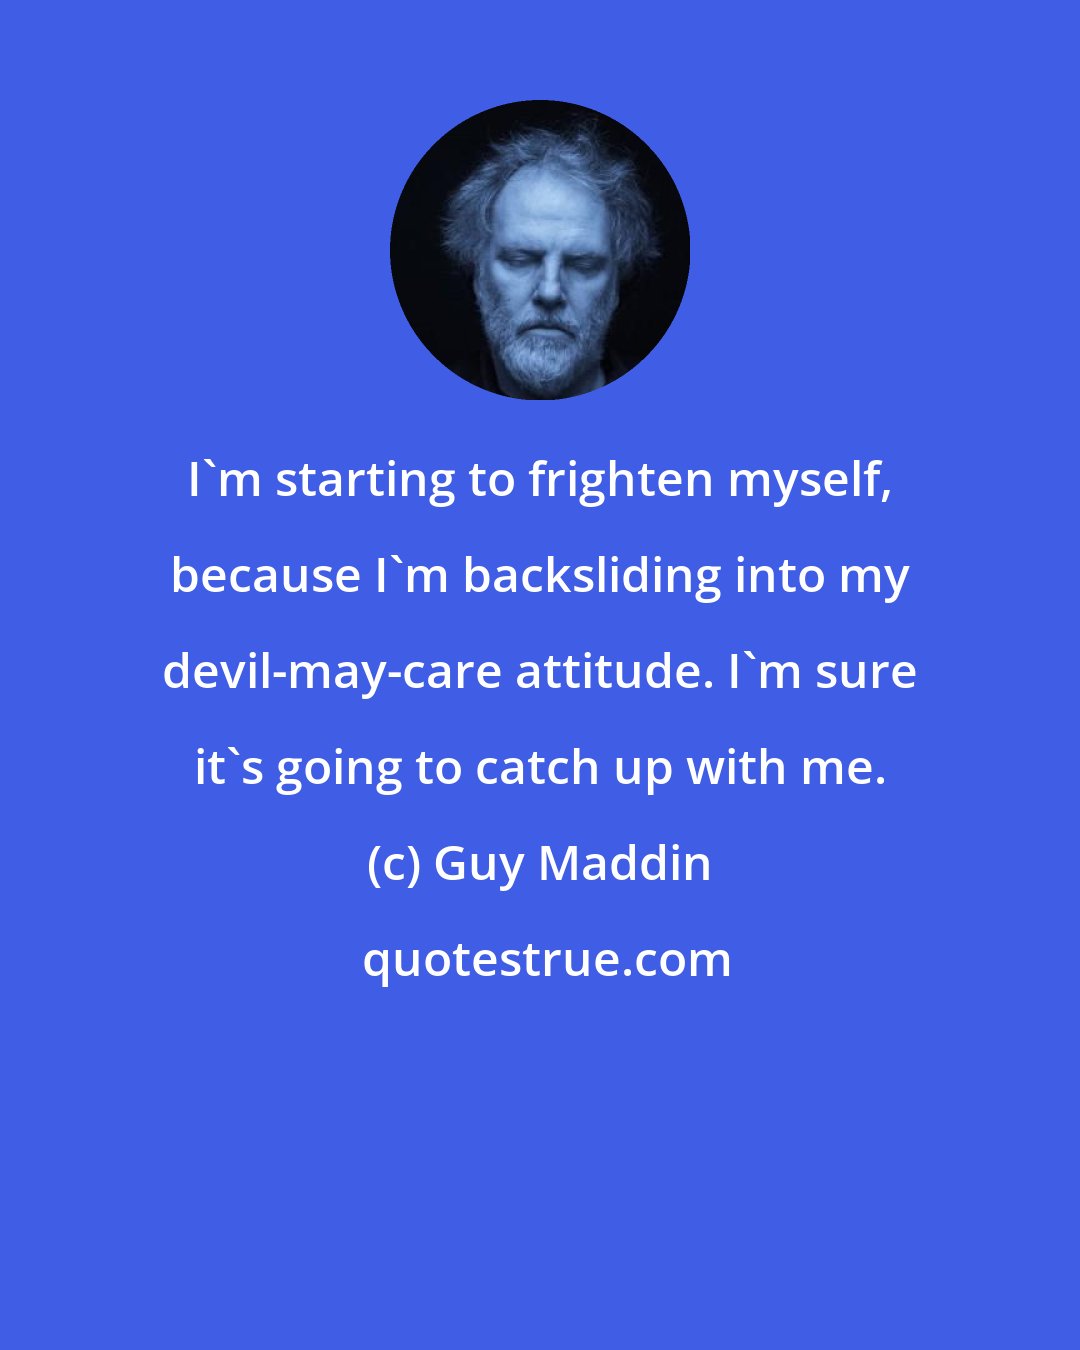 Guy Maddin: I'm starting to frighten myself, because I'm backsliding into my devil-may-care attitude. I'm sure it's going to catch up with me.